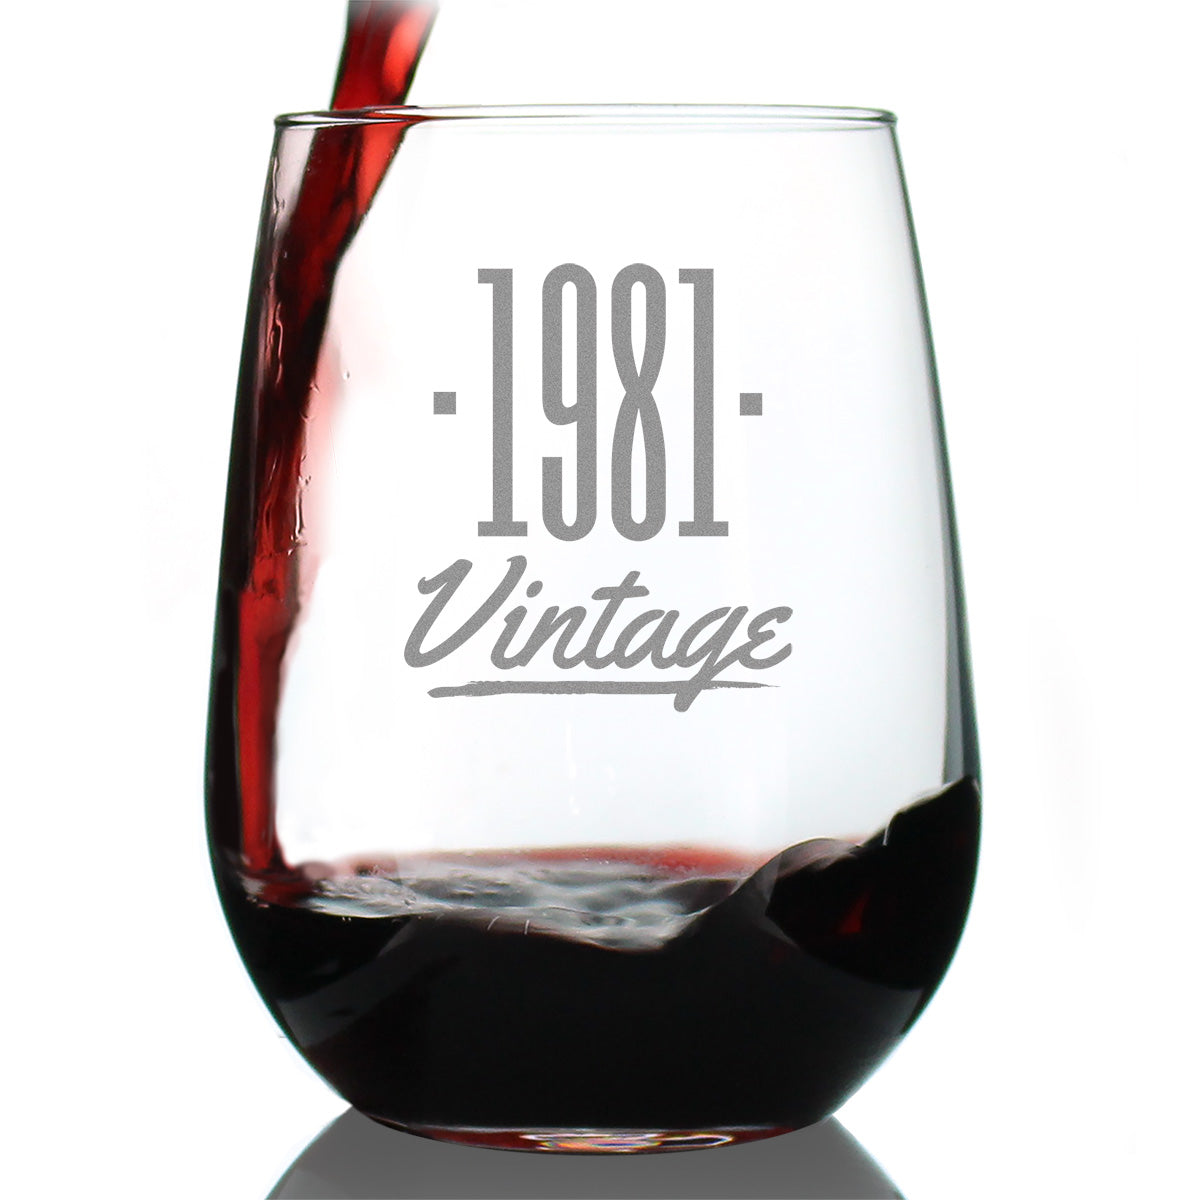 Vintage 1981 - 43rd Birthday Stemless Wine Glass Gifts for Women &amp; Men Turning 43 - Bday Party Decor - Large Glasses